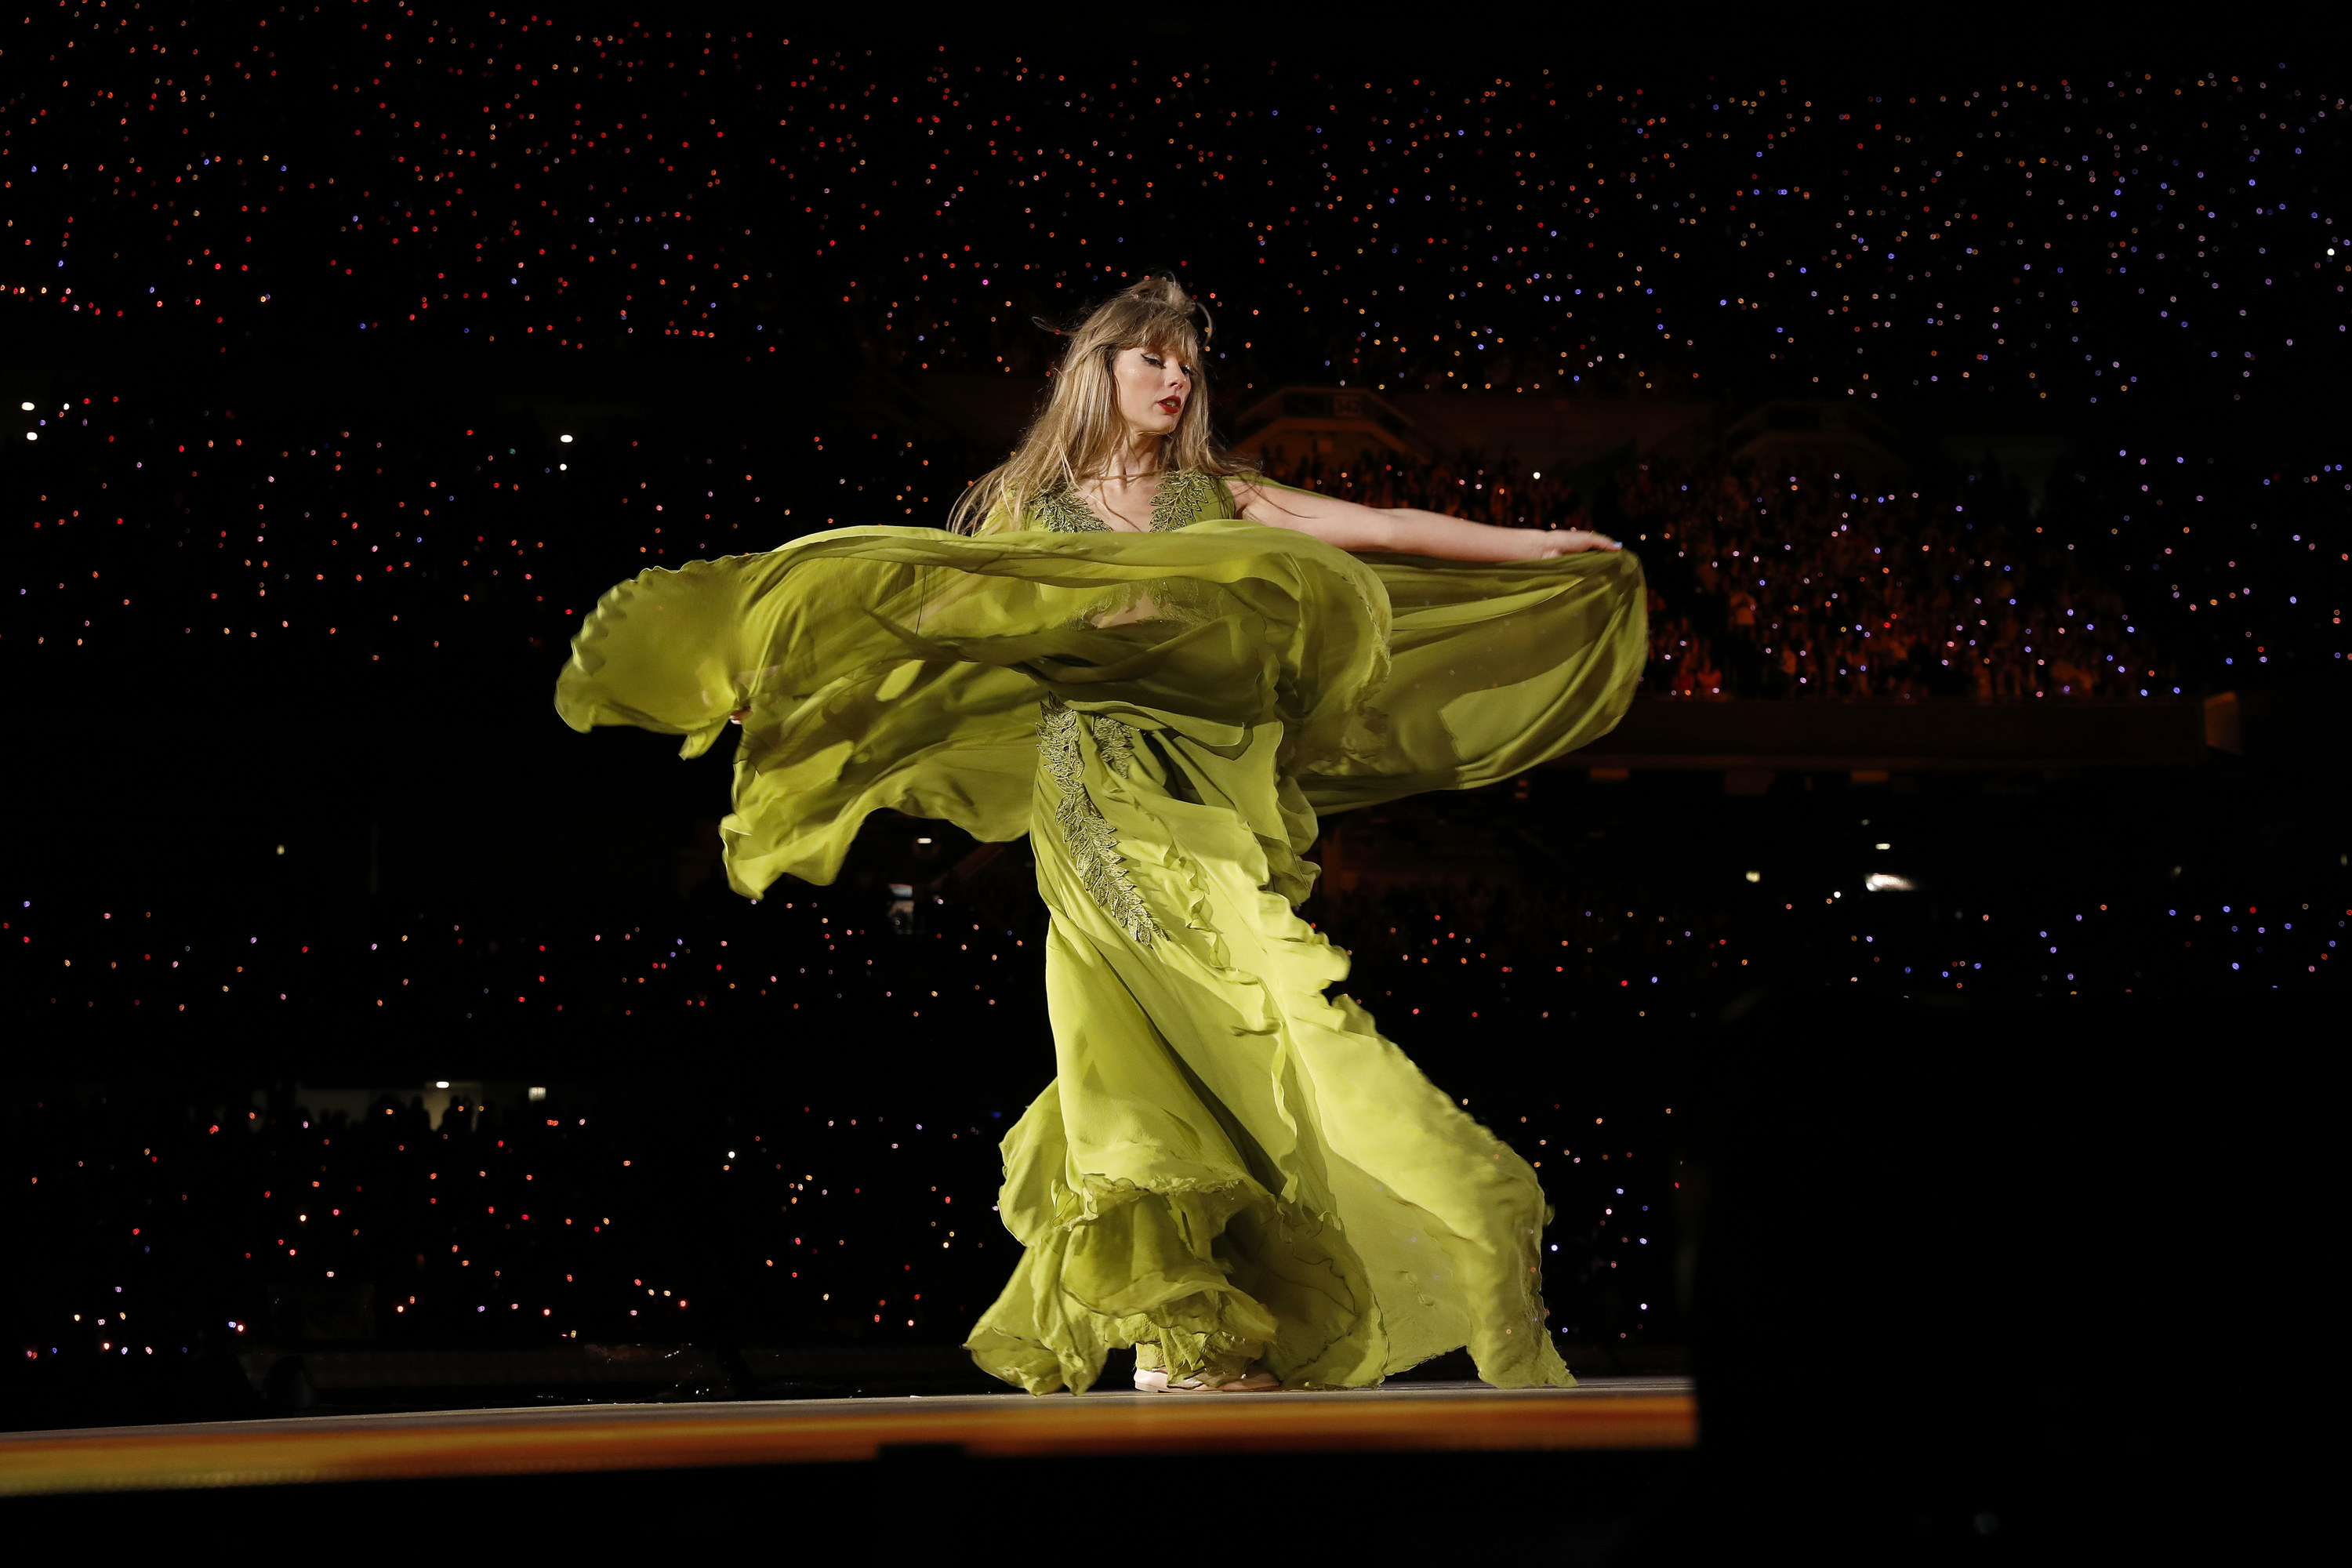 Taylor performing on stage